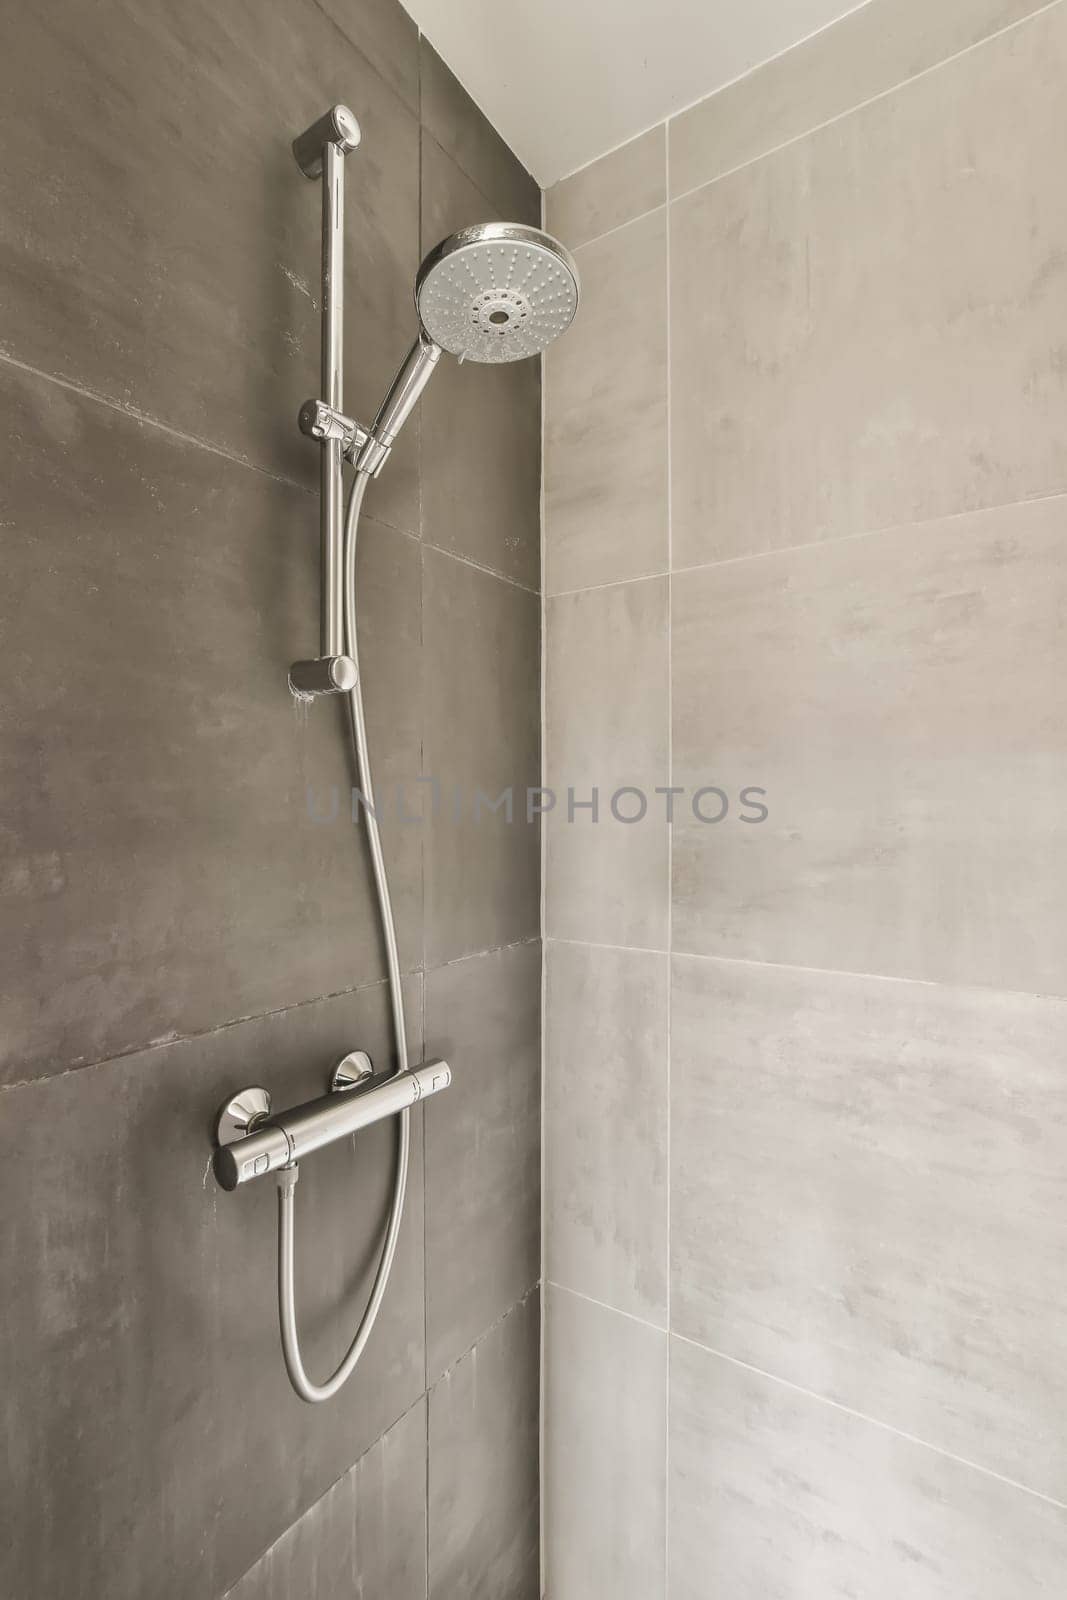 a shower in a tiled bathroom with grey tiles by casamedia